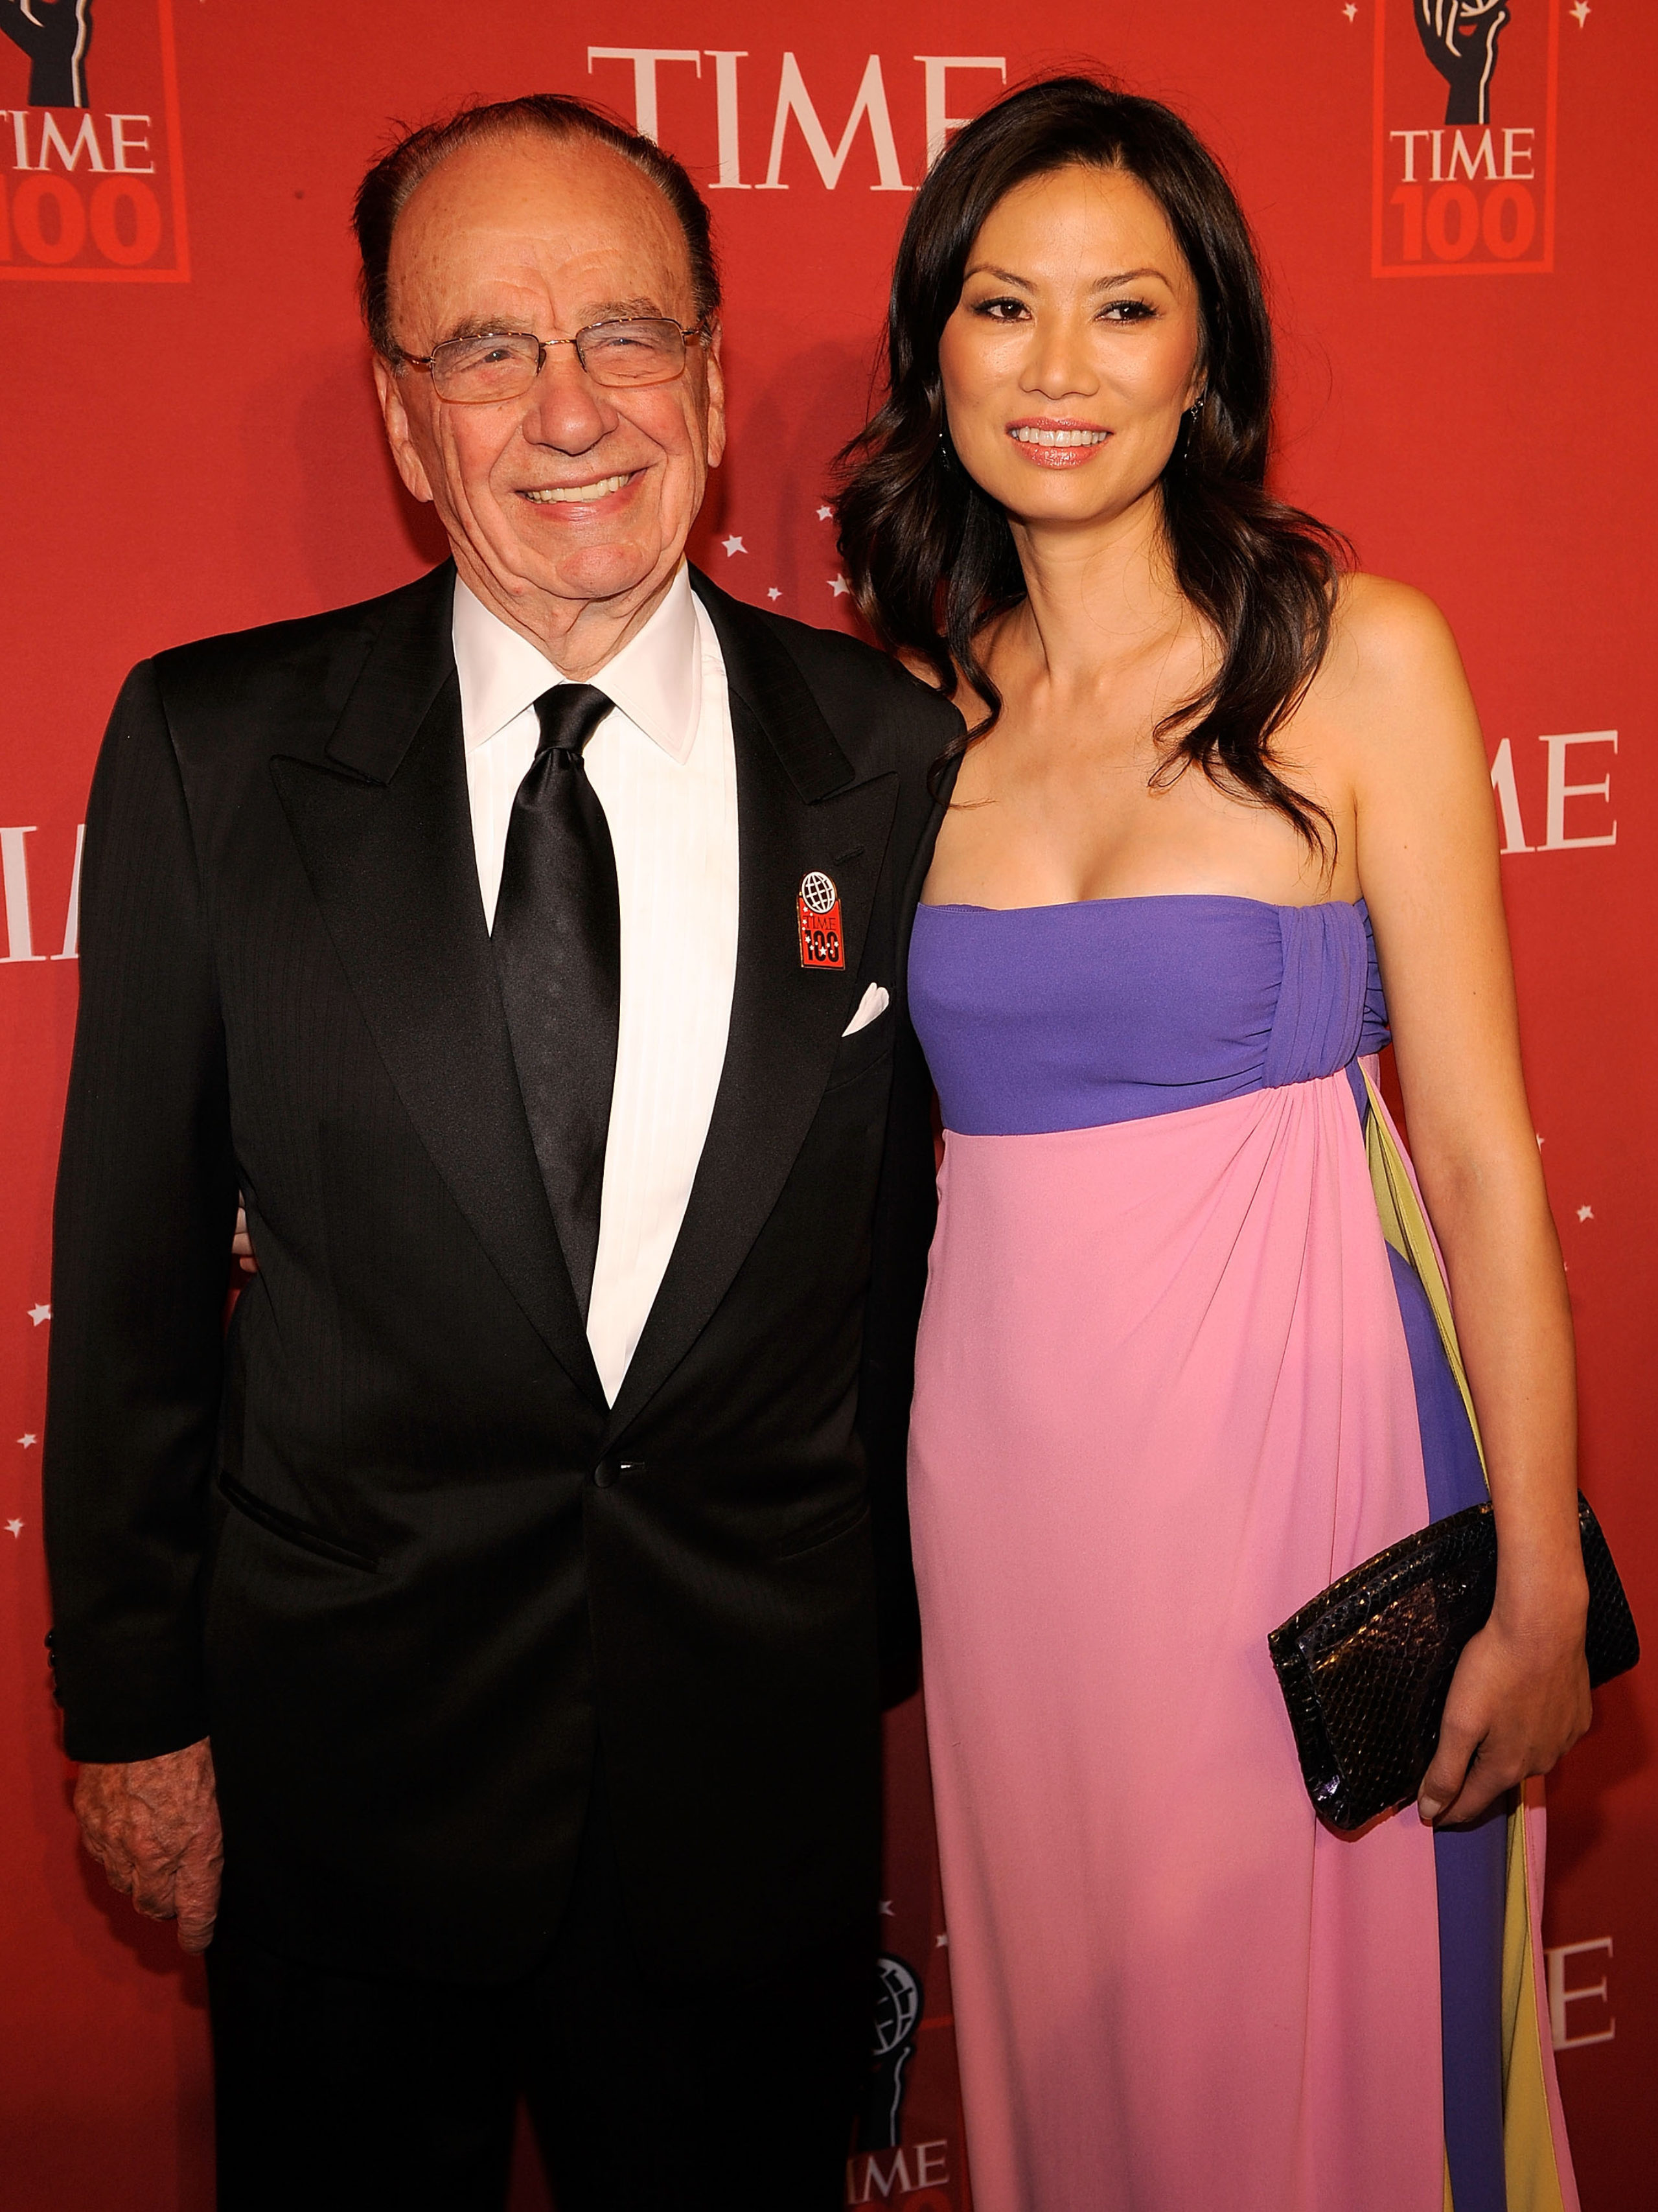 Rupert Murdoch and wife Wendi Deng attend Time's 100 Most Influential People in the World gala at Jazz at Lincoln Center on May 8, 2008 in New York City. (Photo by L. Busacca/WireImage)